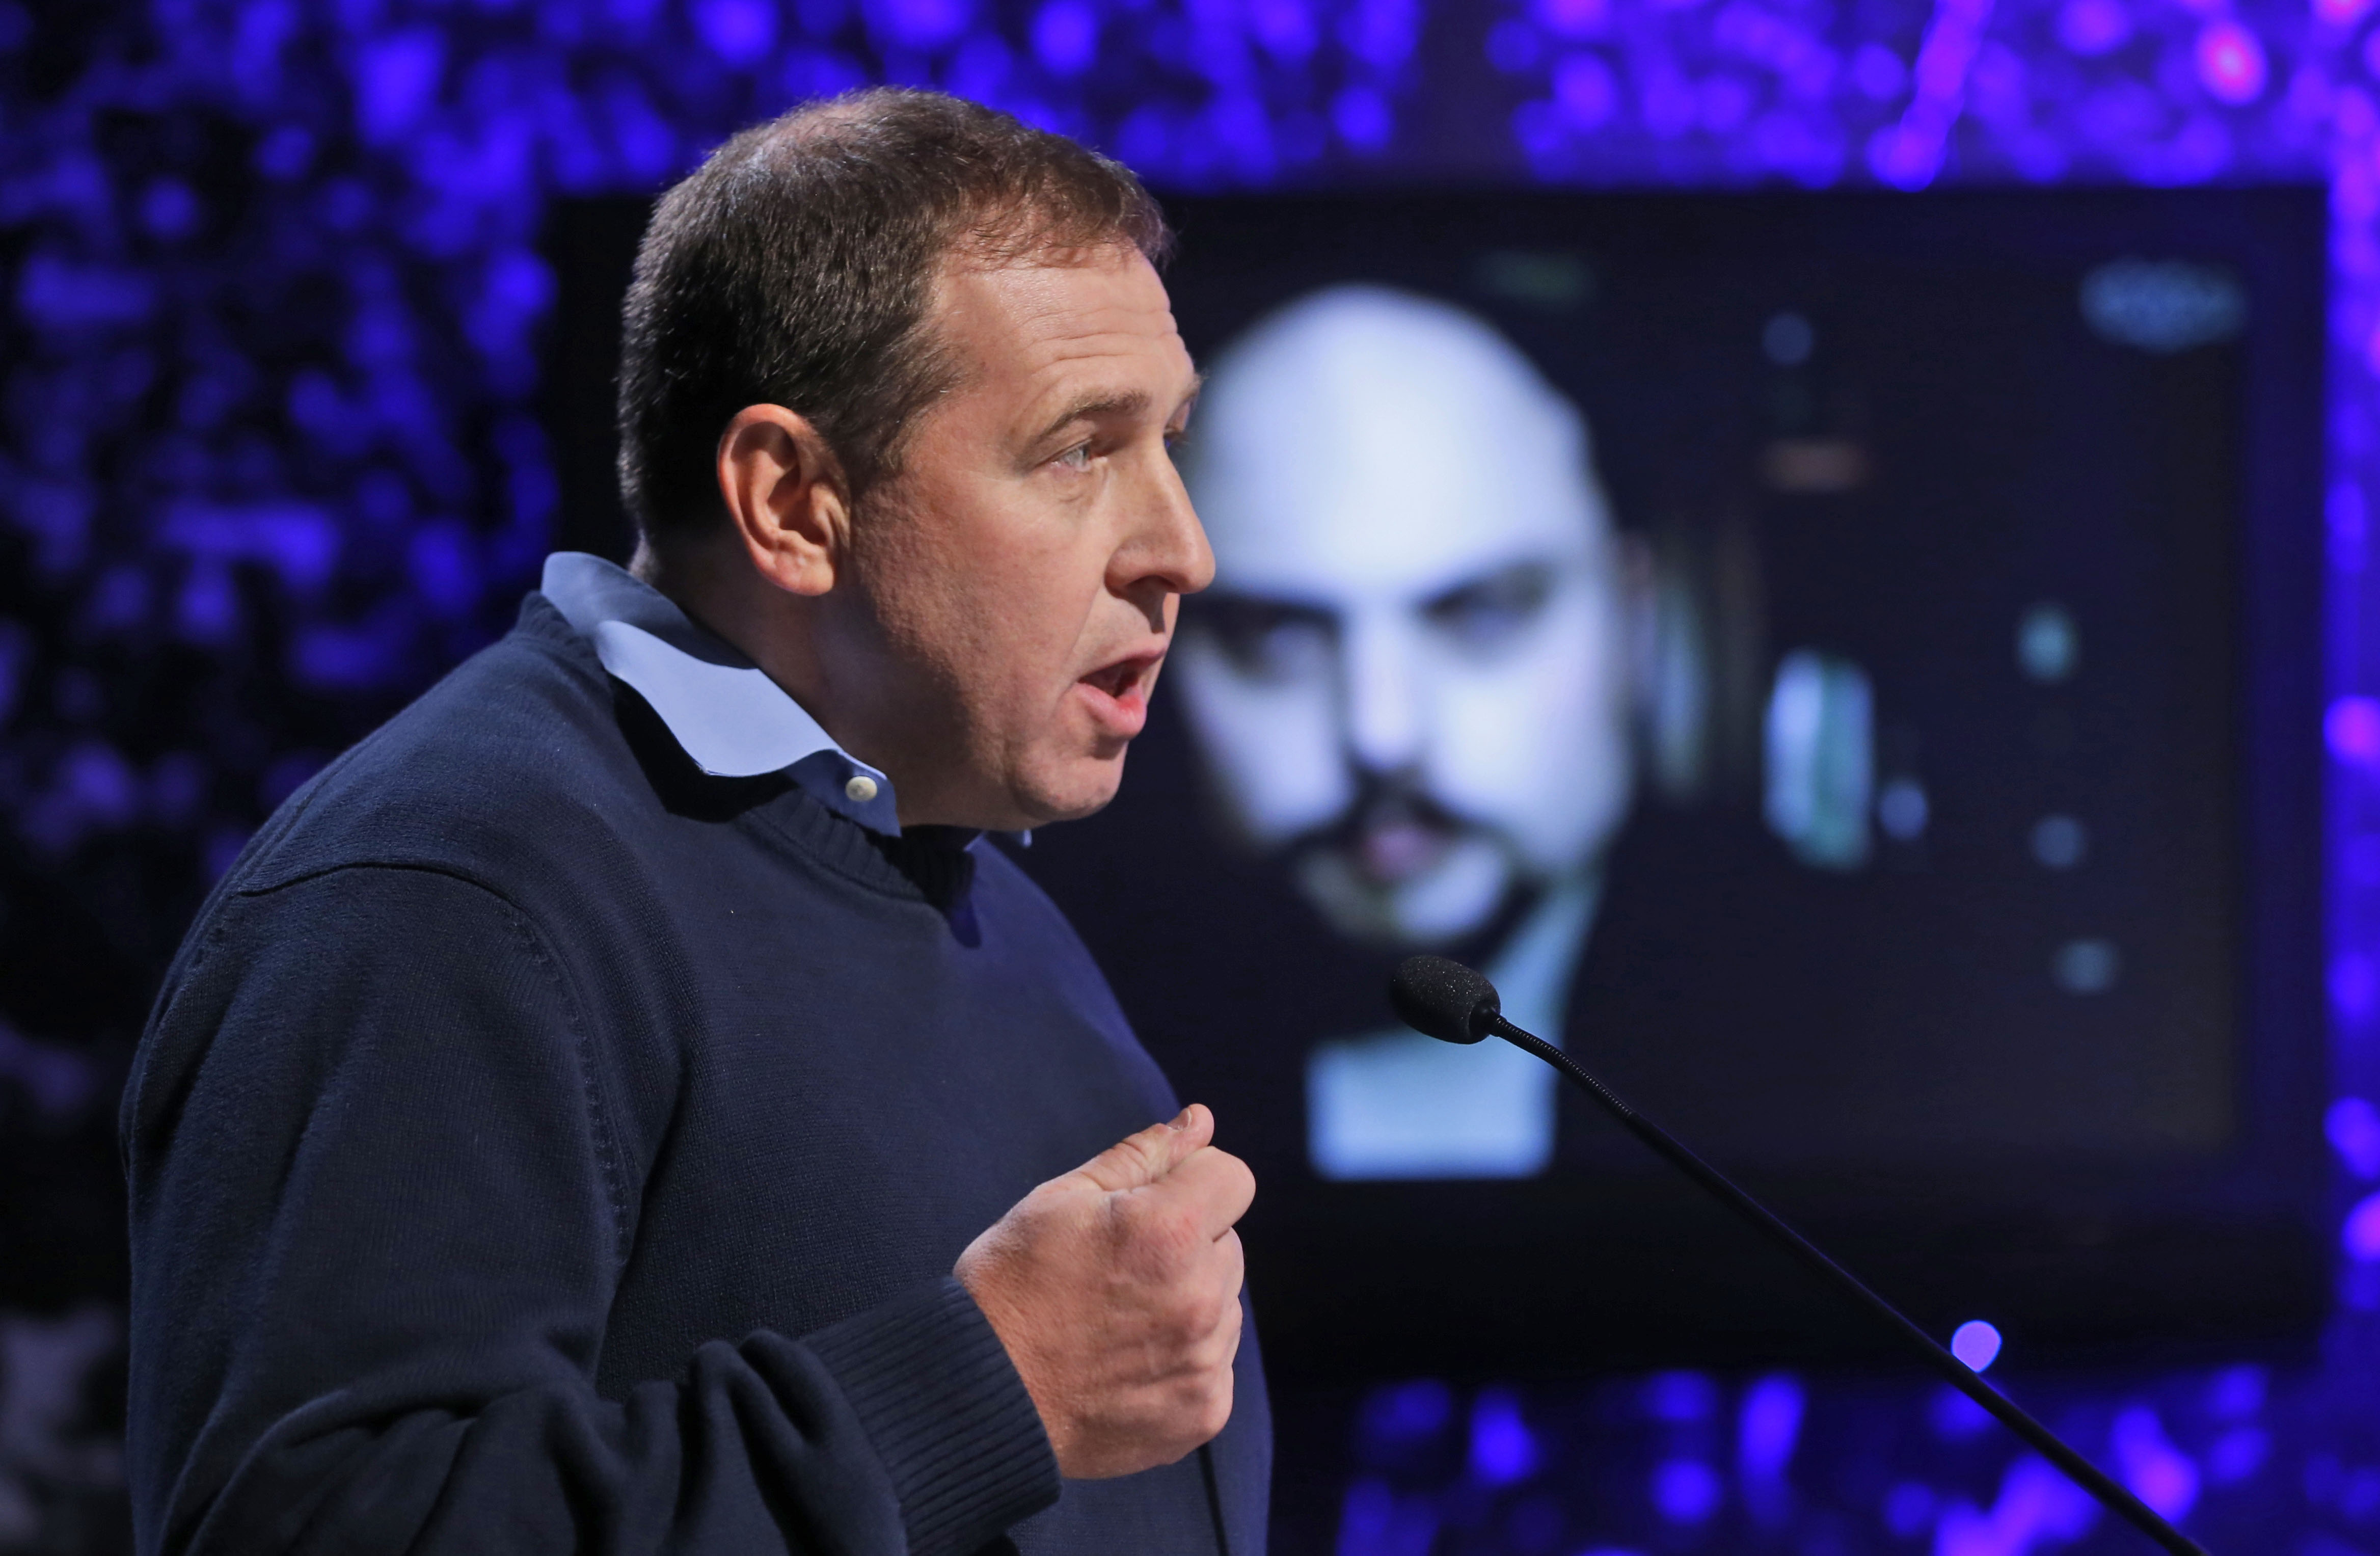 Russian economist Andrei Illarionov speaks during a debate on Russian television in this file photo from Oct. 9, 2012